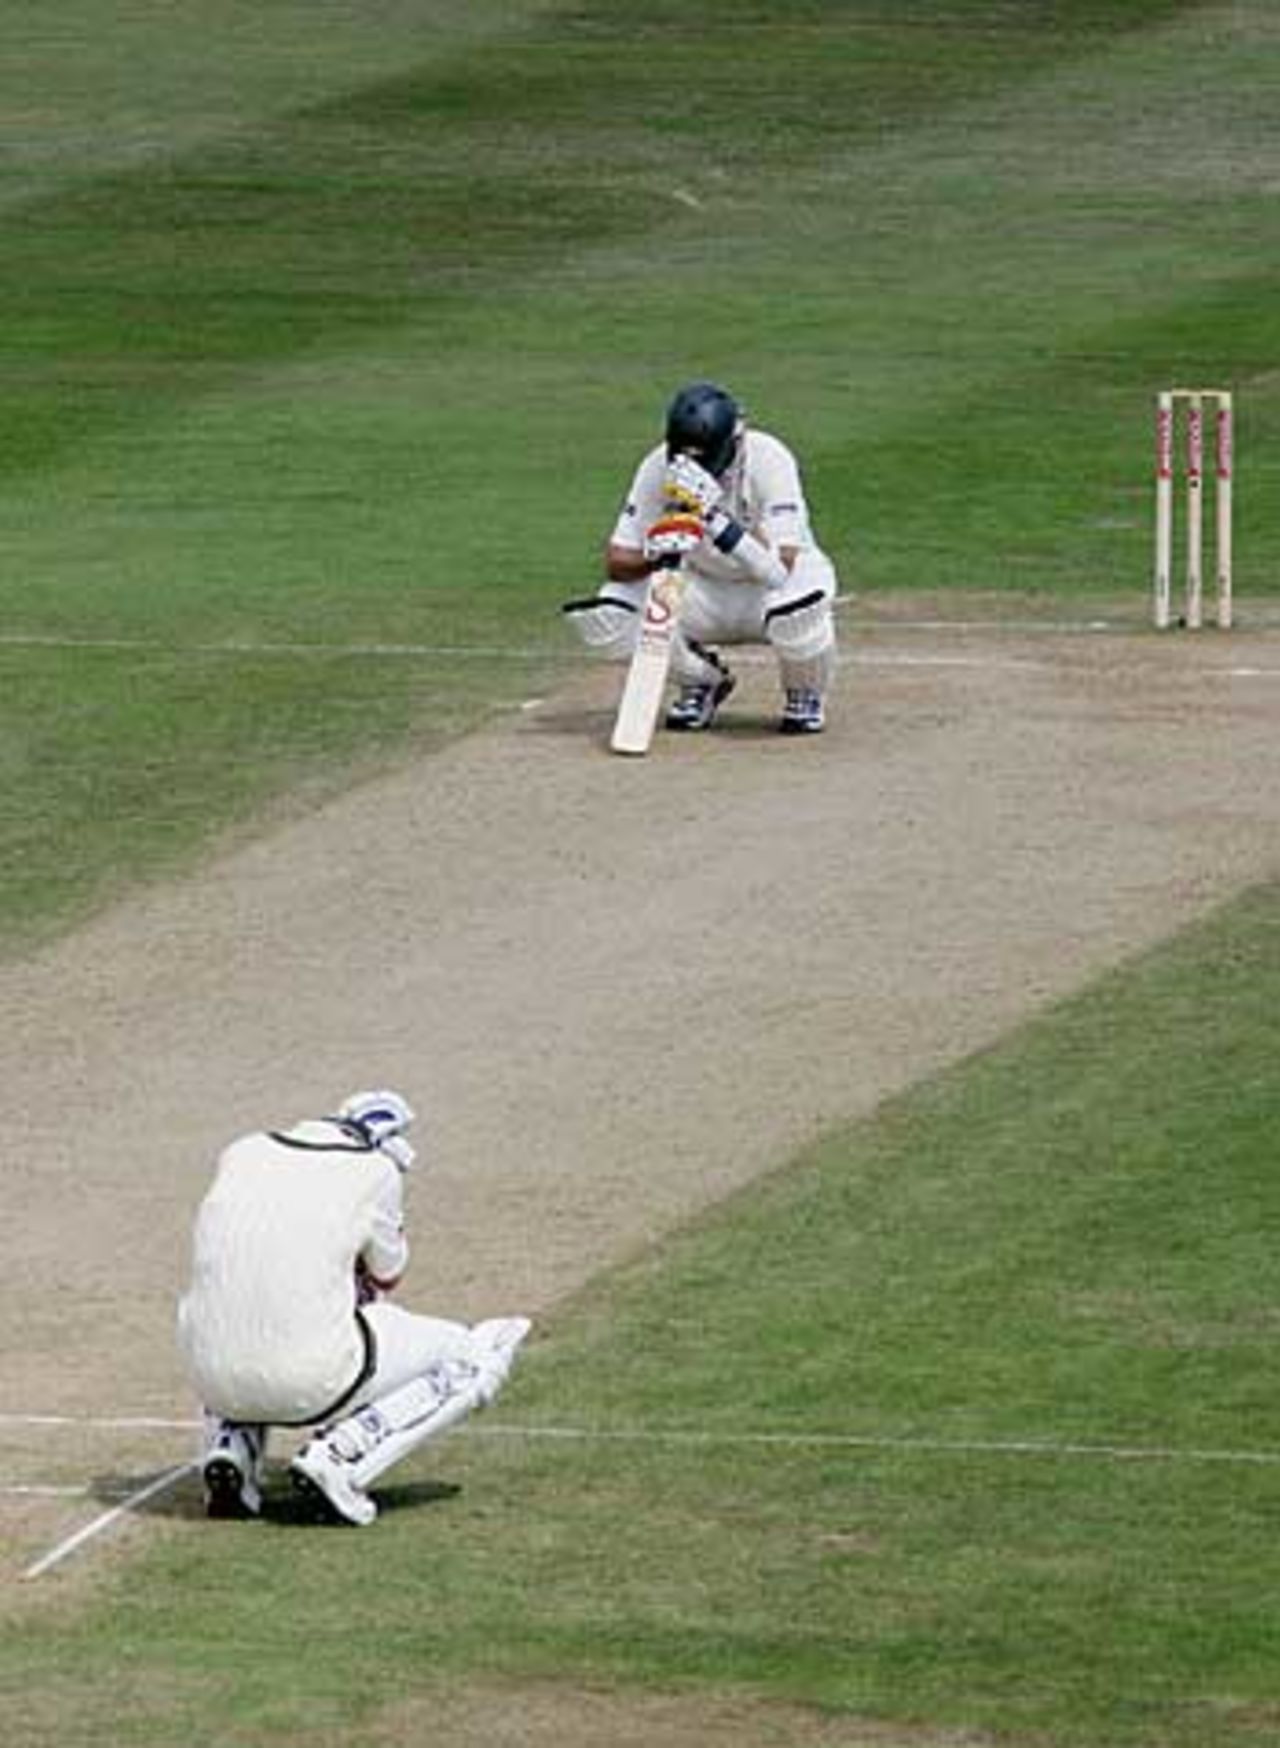 Brett Lee and Michael Kasprowicz immediately sink to their knees as England took the final wicket to win, on a nail-biting fourth day at Edgbaston, England v Australia, August 7, 2005